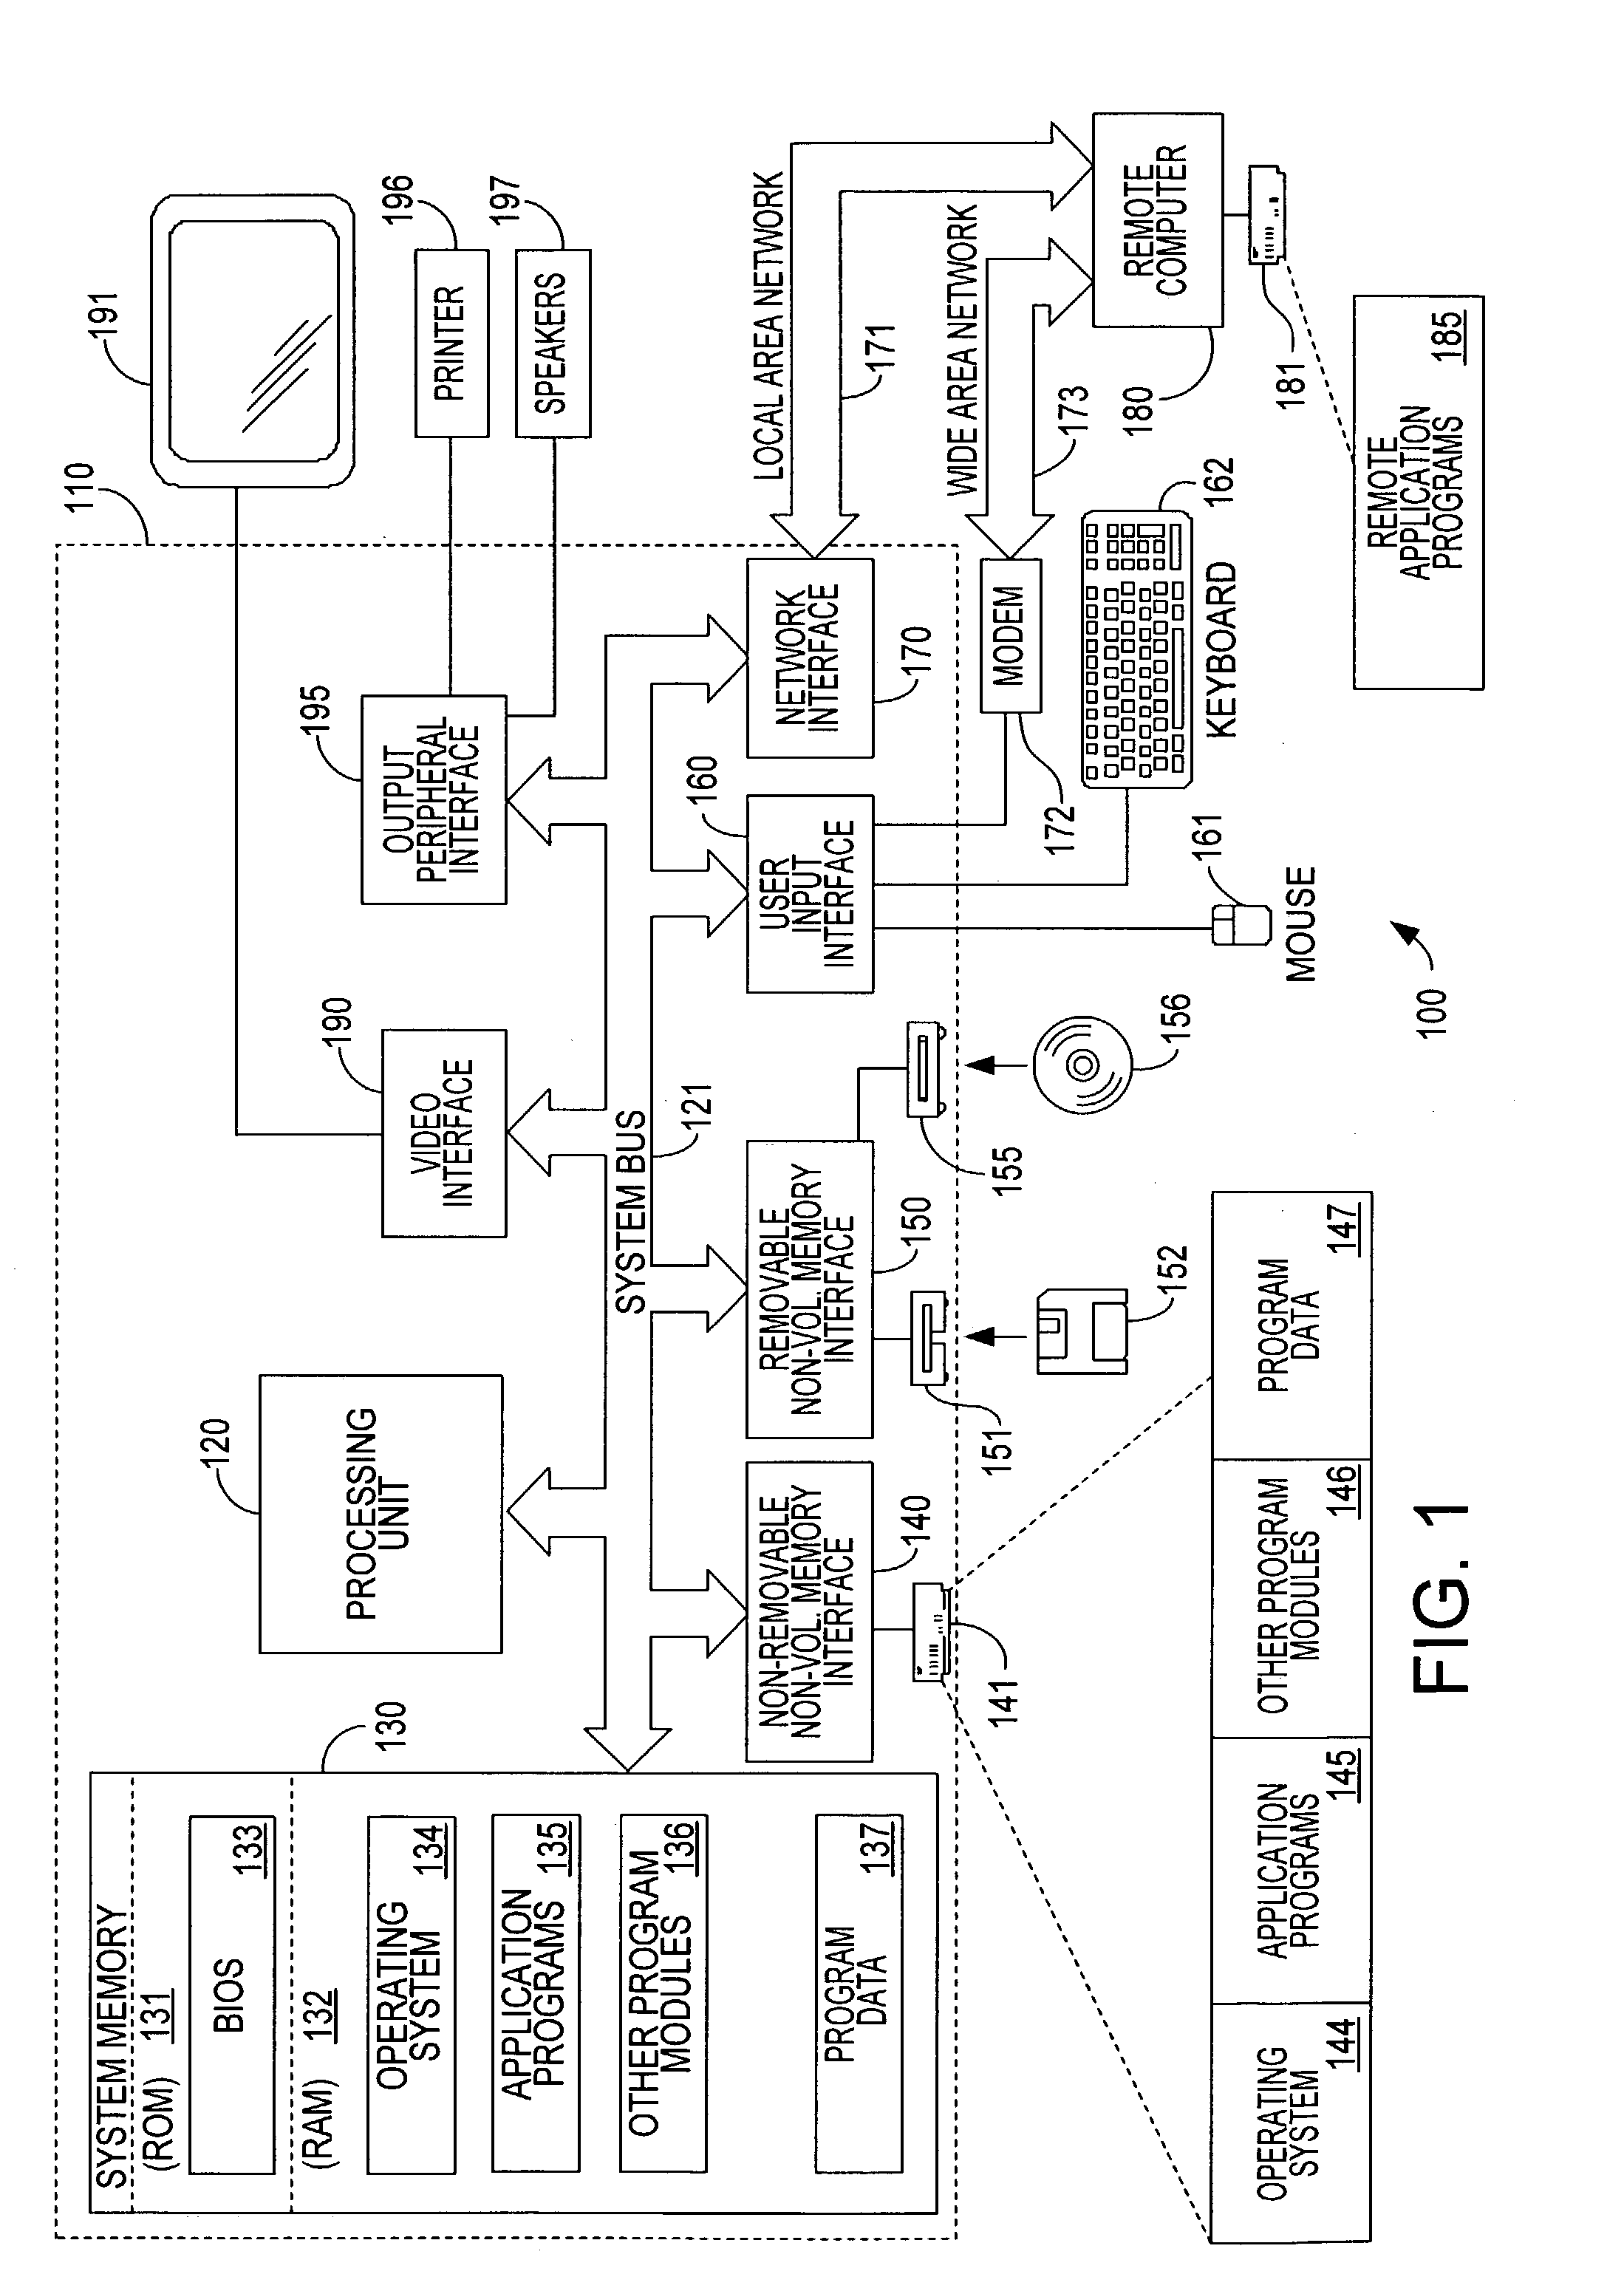 Peer-to-peer record structure and query language for searching and discovery thereof